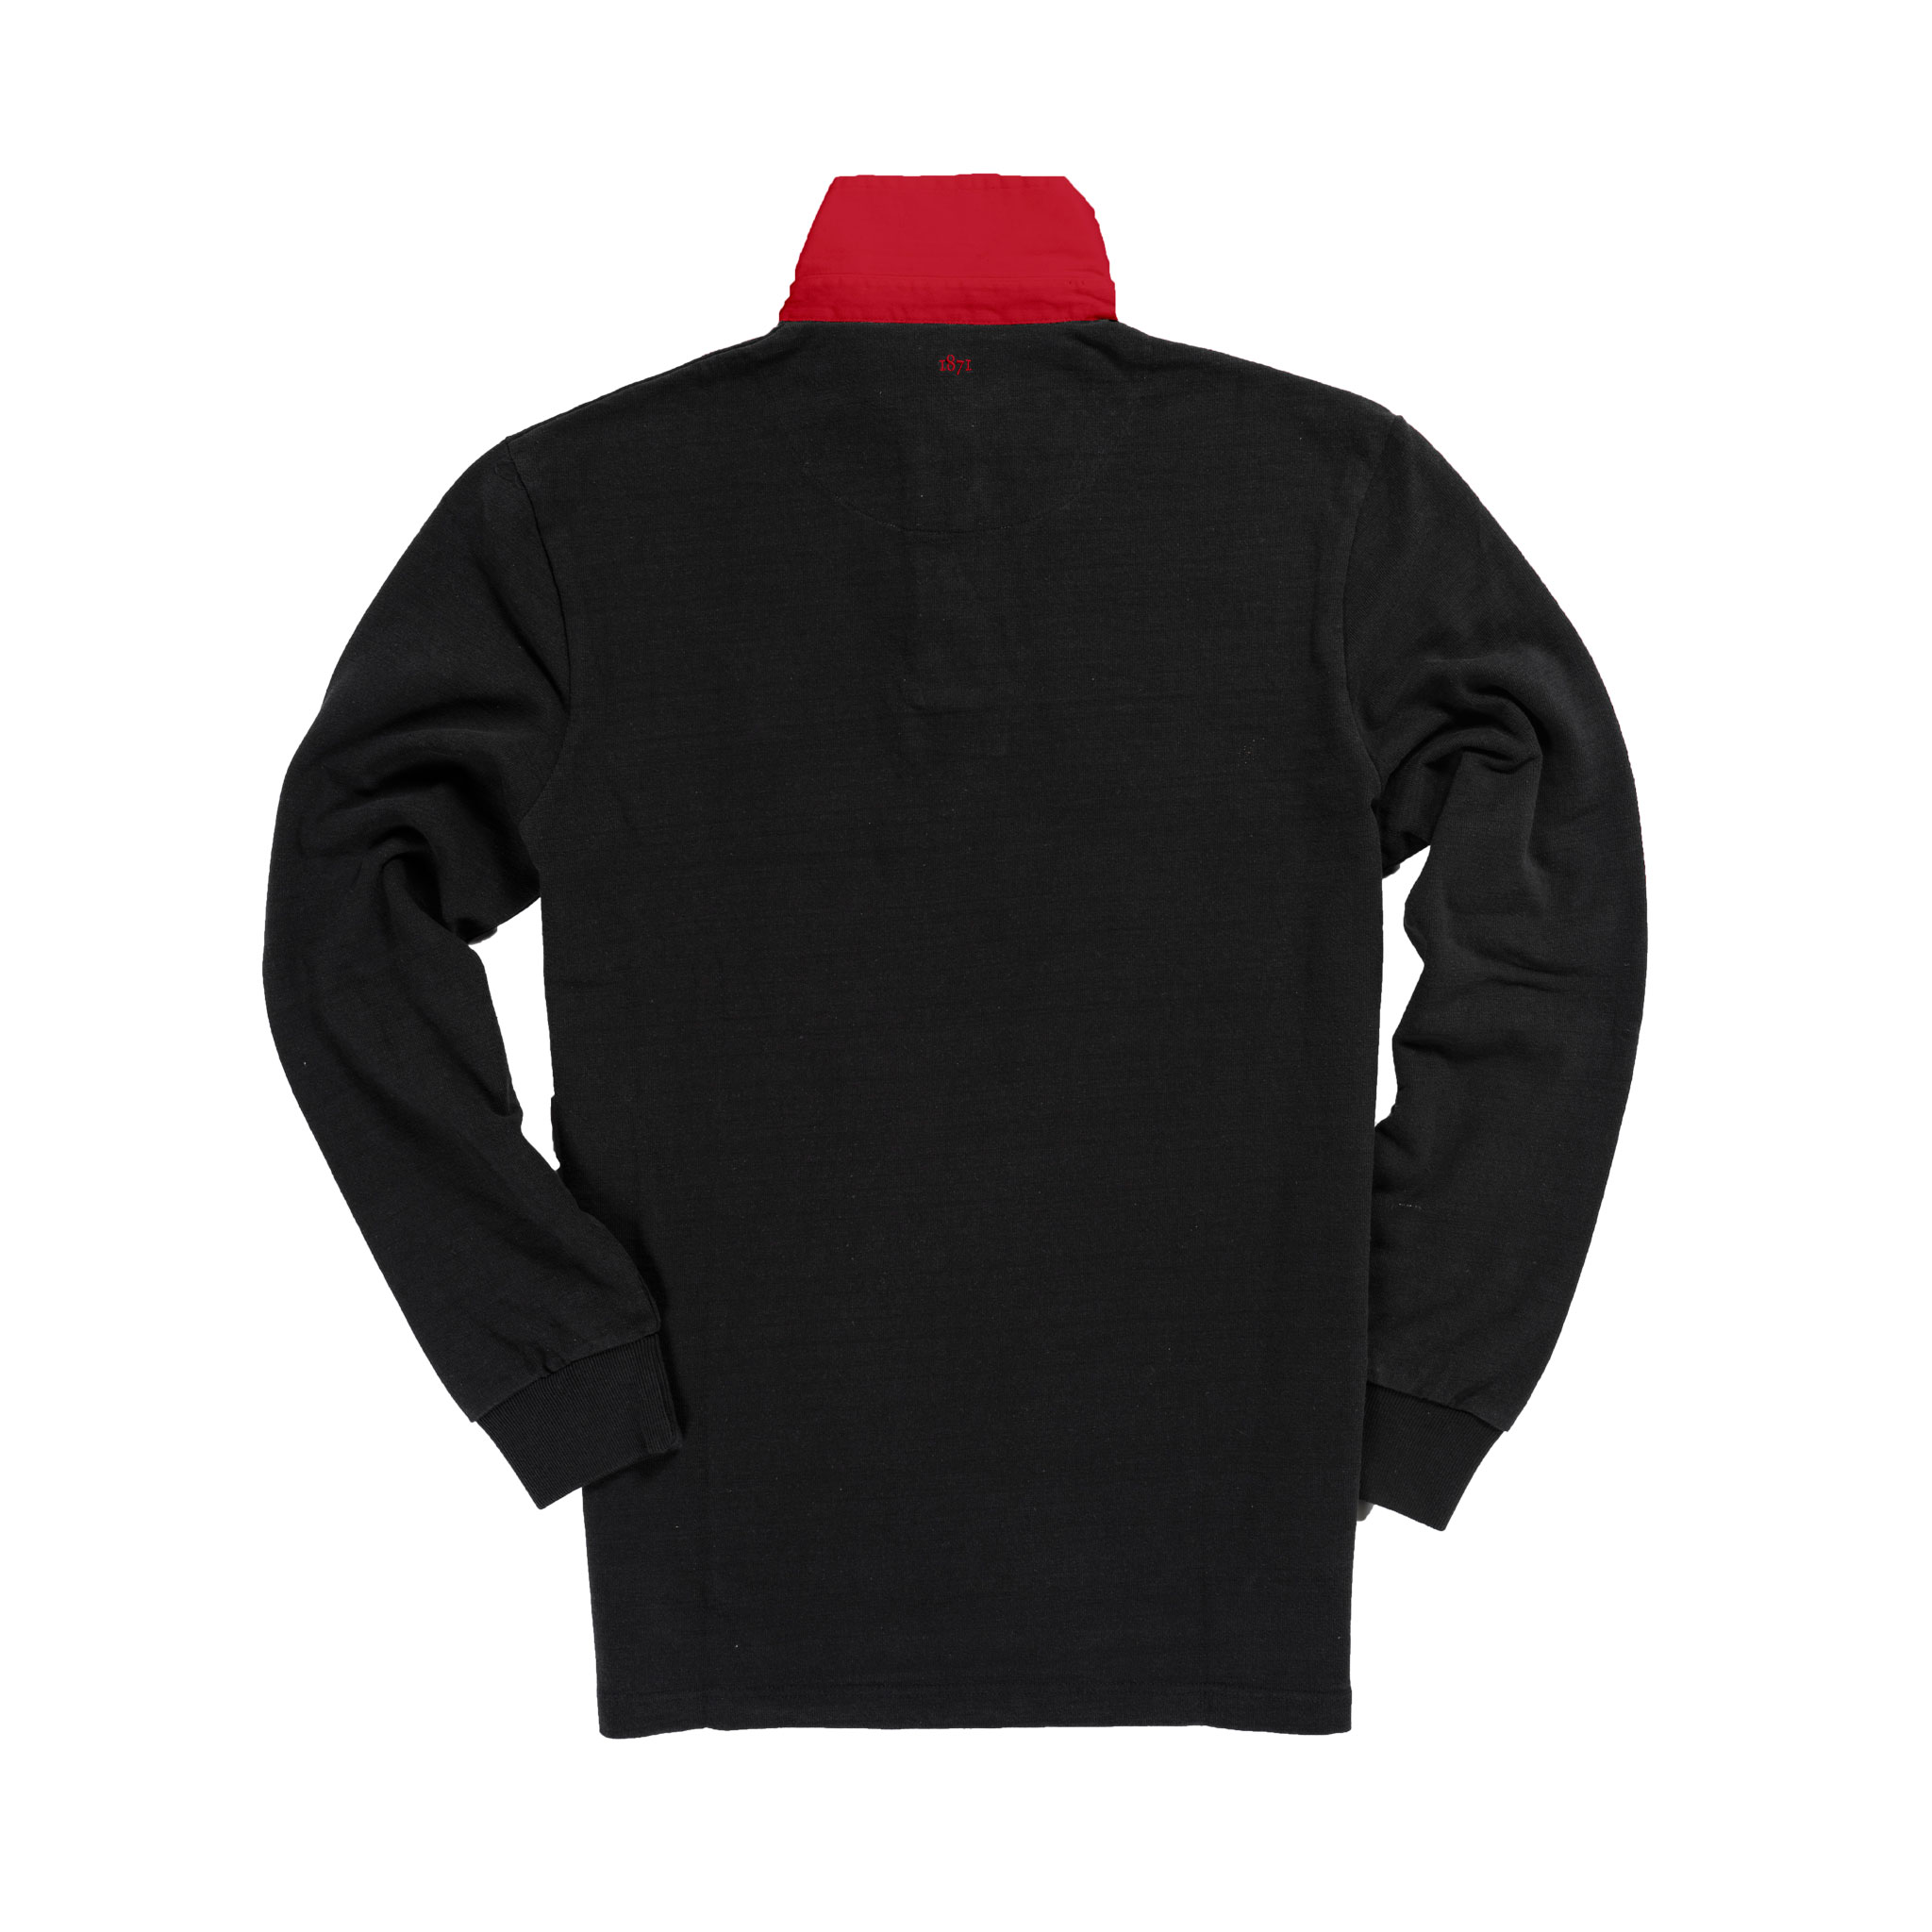 Classic Black 1871 Vintage Rugby Shirt with Red Collar_Back